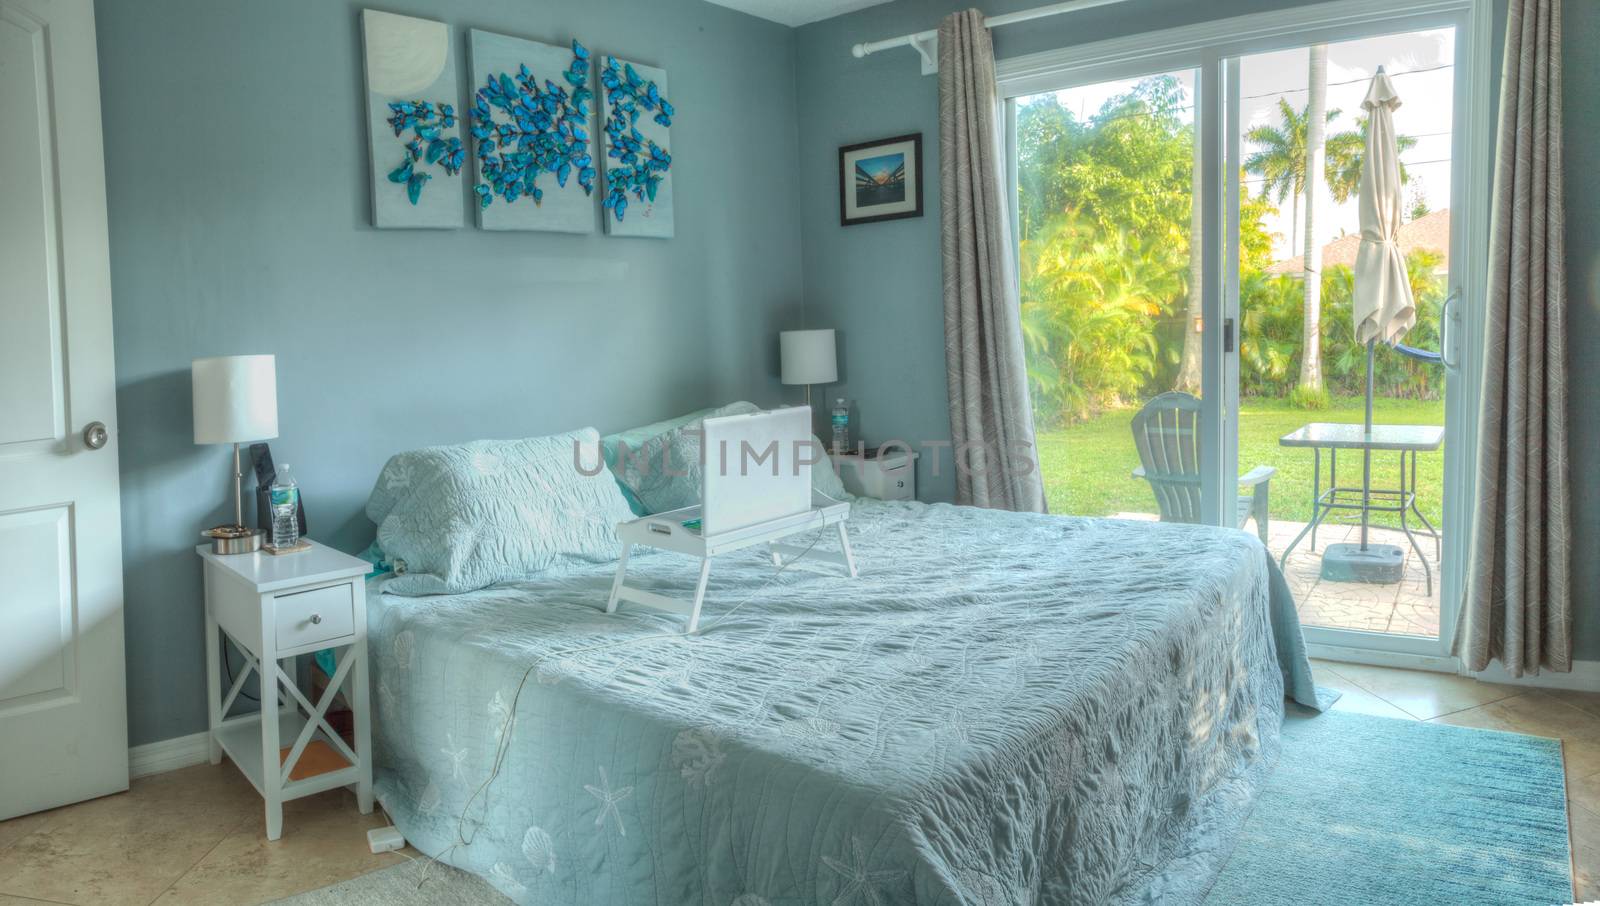 Garden view from a tranquil bedroom done in tropical blues with a Florida architectural design style.